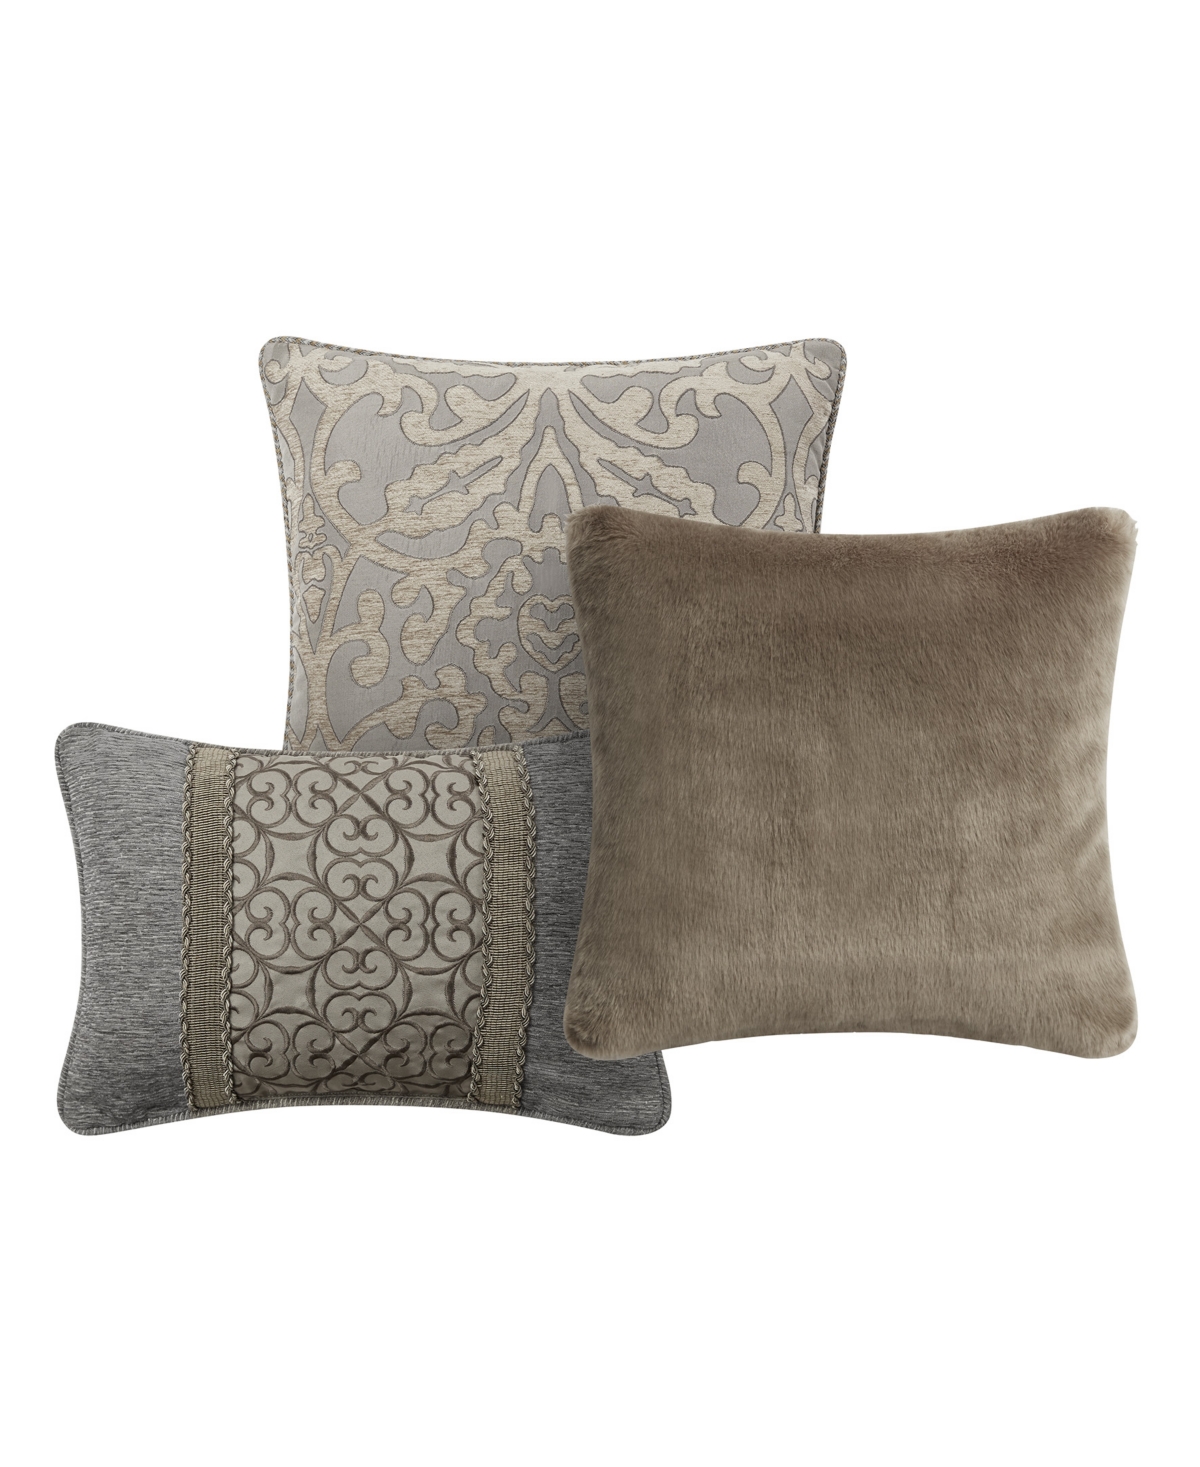 WATERFORD CARRICK DECORATIVE PILLOWS SET OF 3 BEDDING